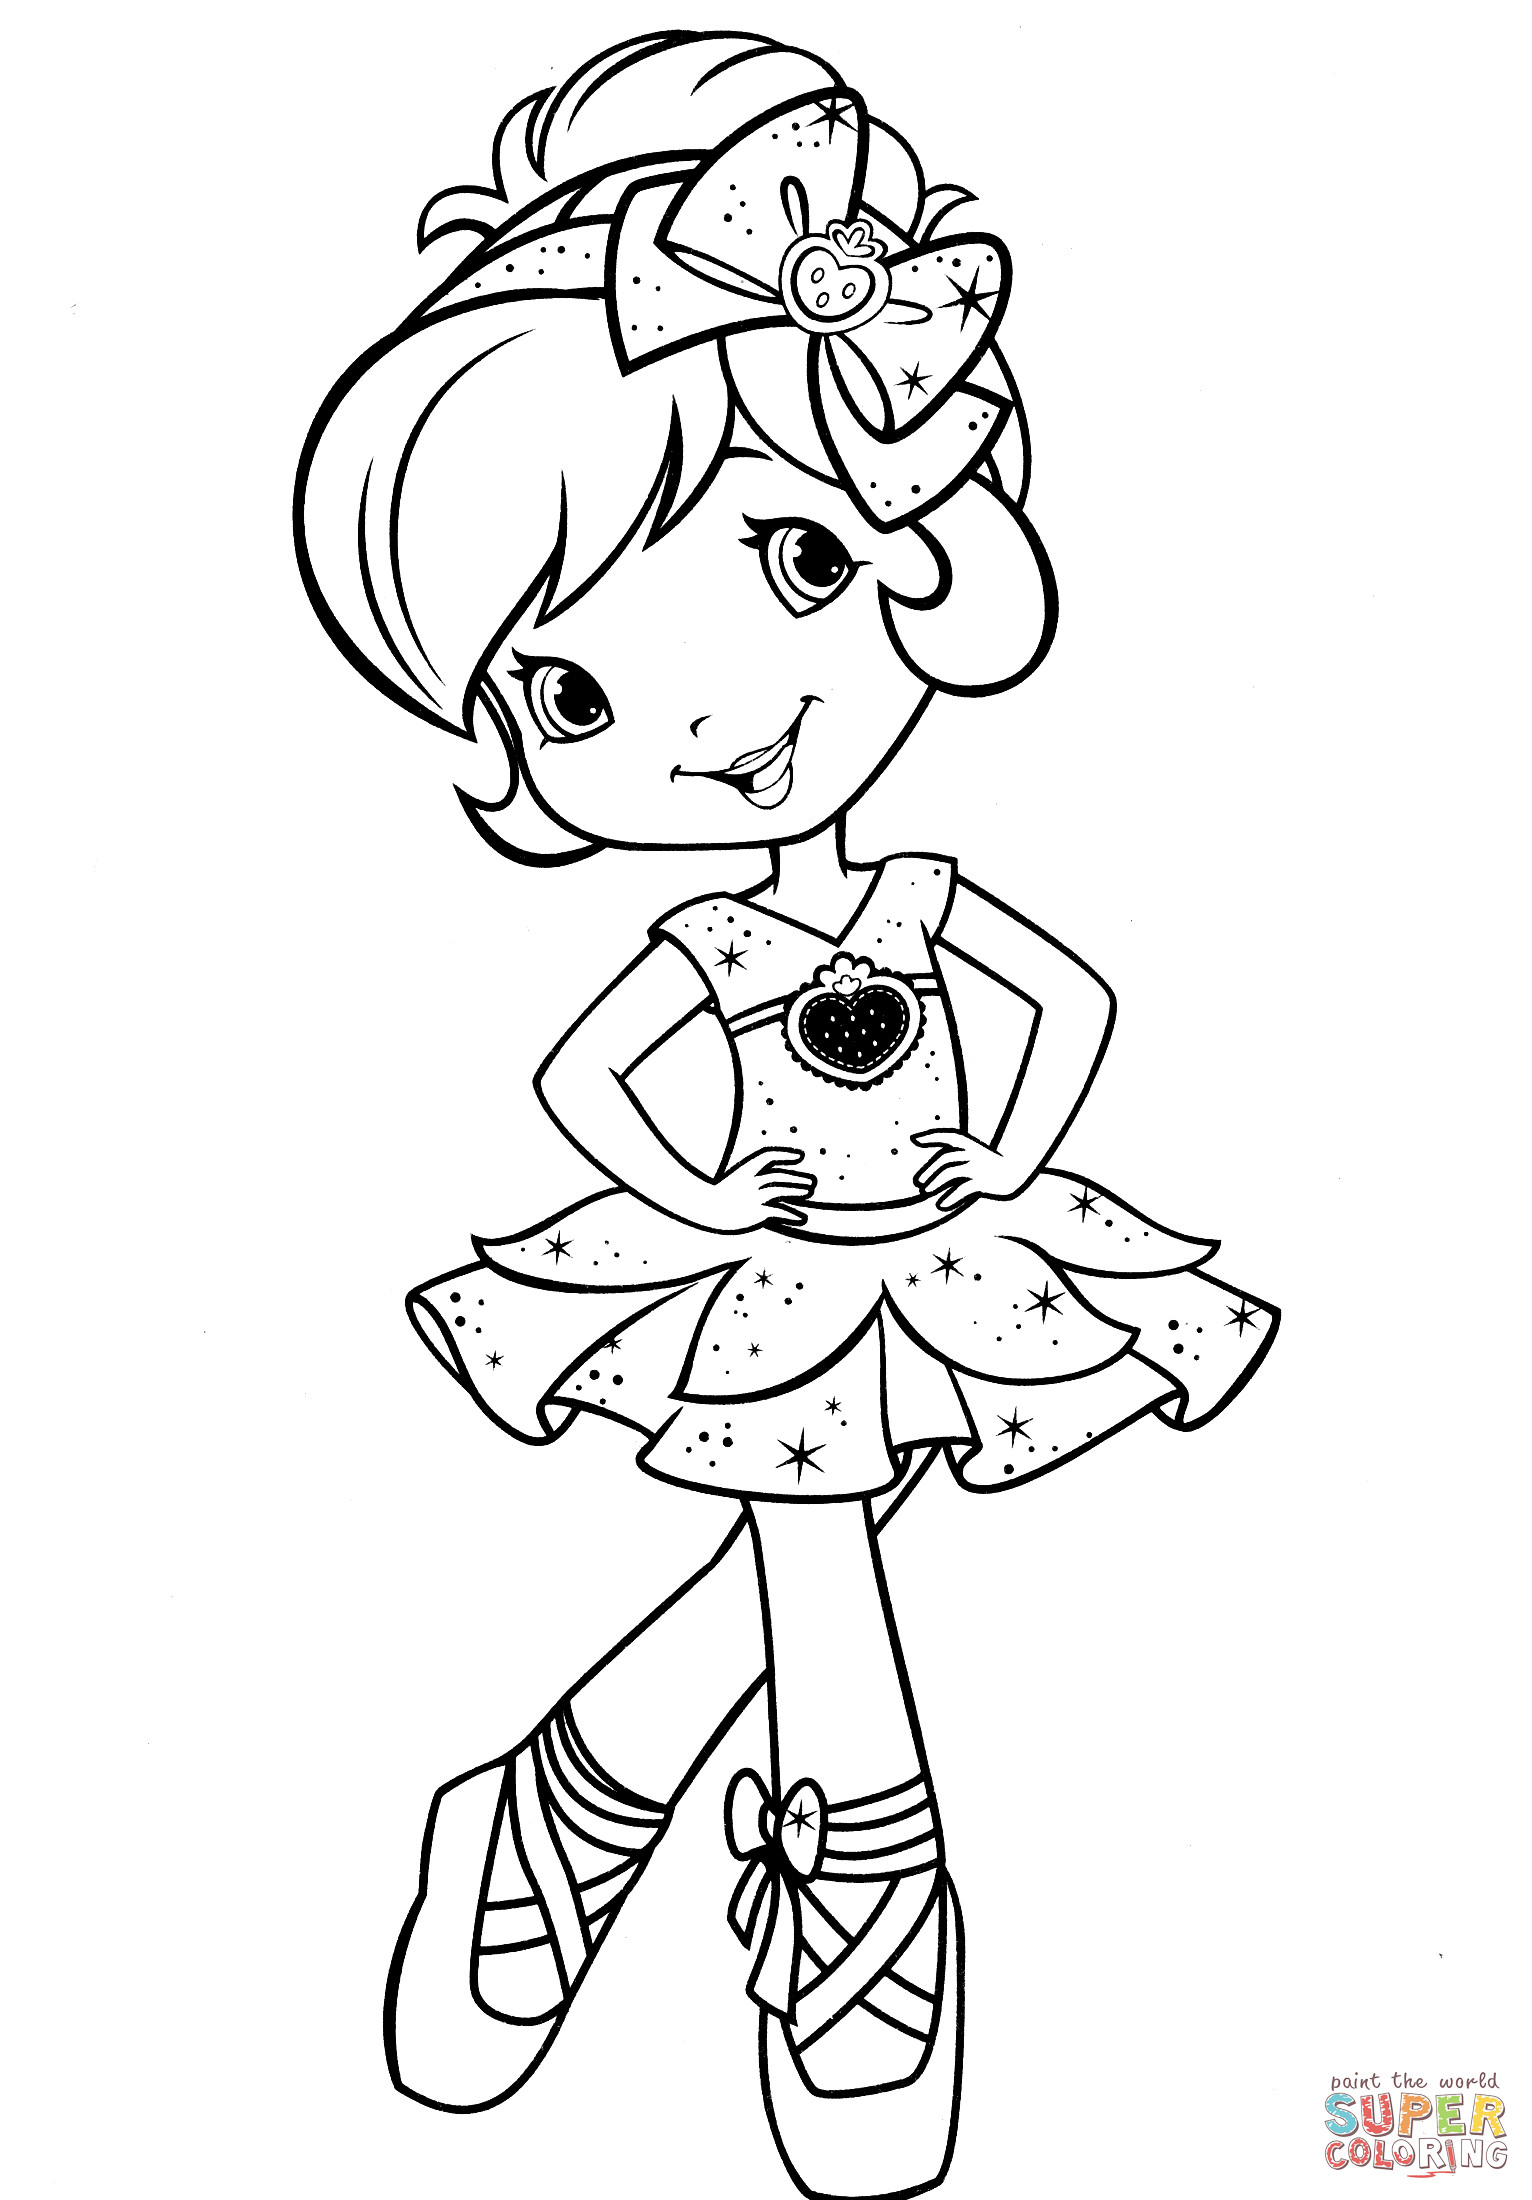 Balerina Coloring Pages
 Ballerina Coloring Pages StadriemblemS